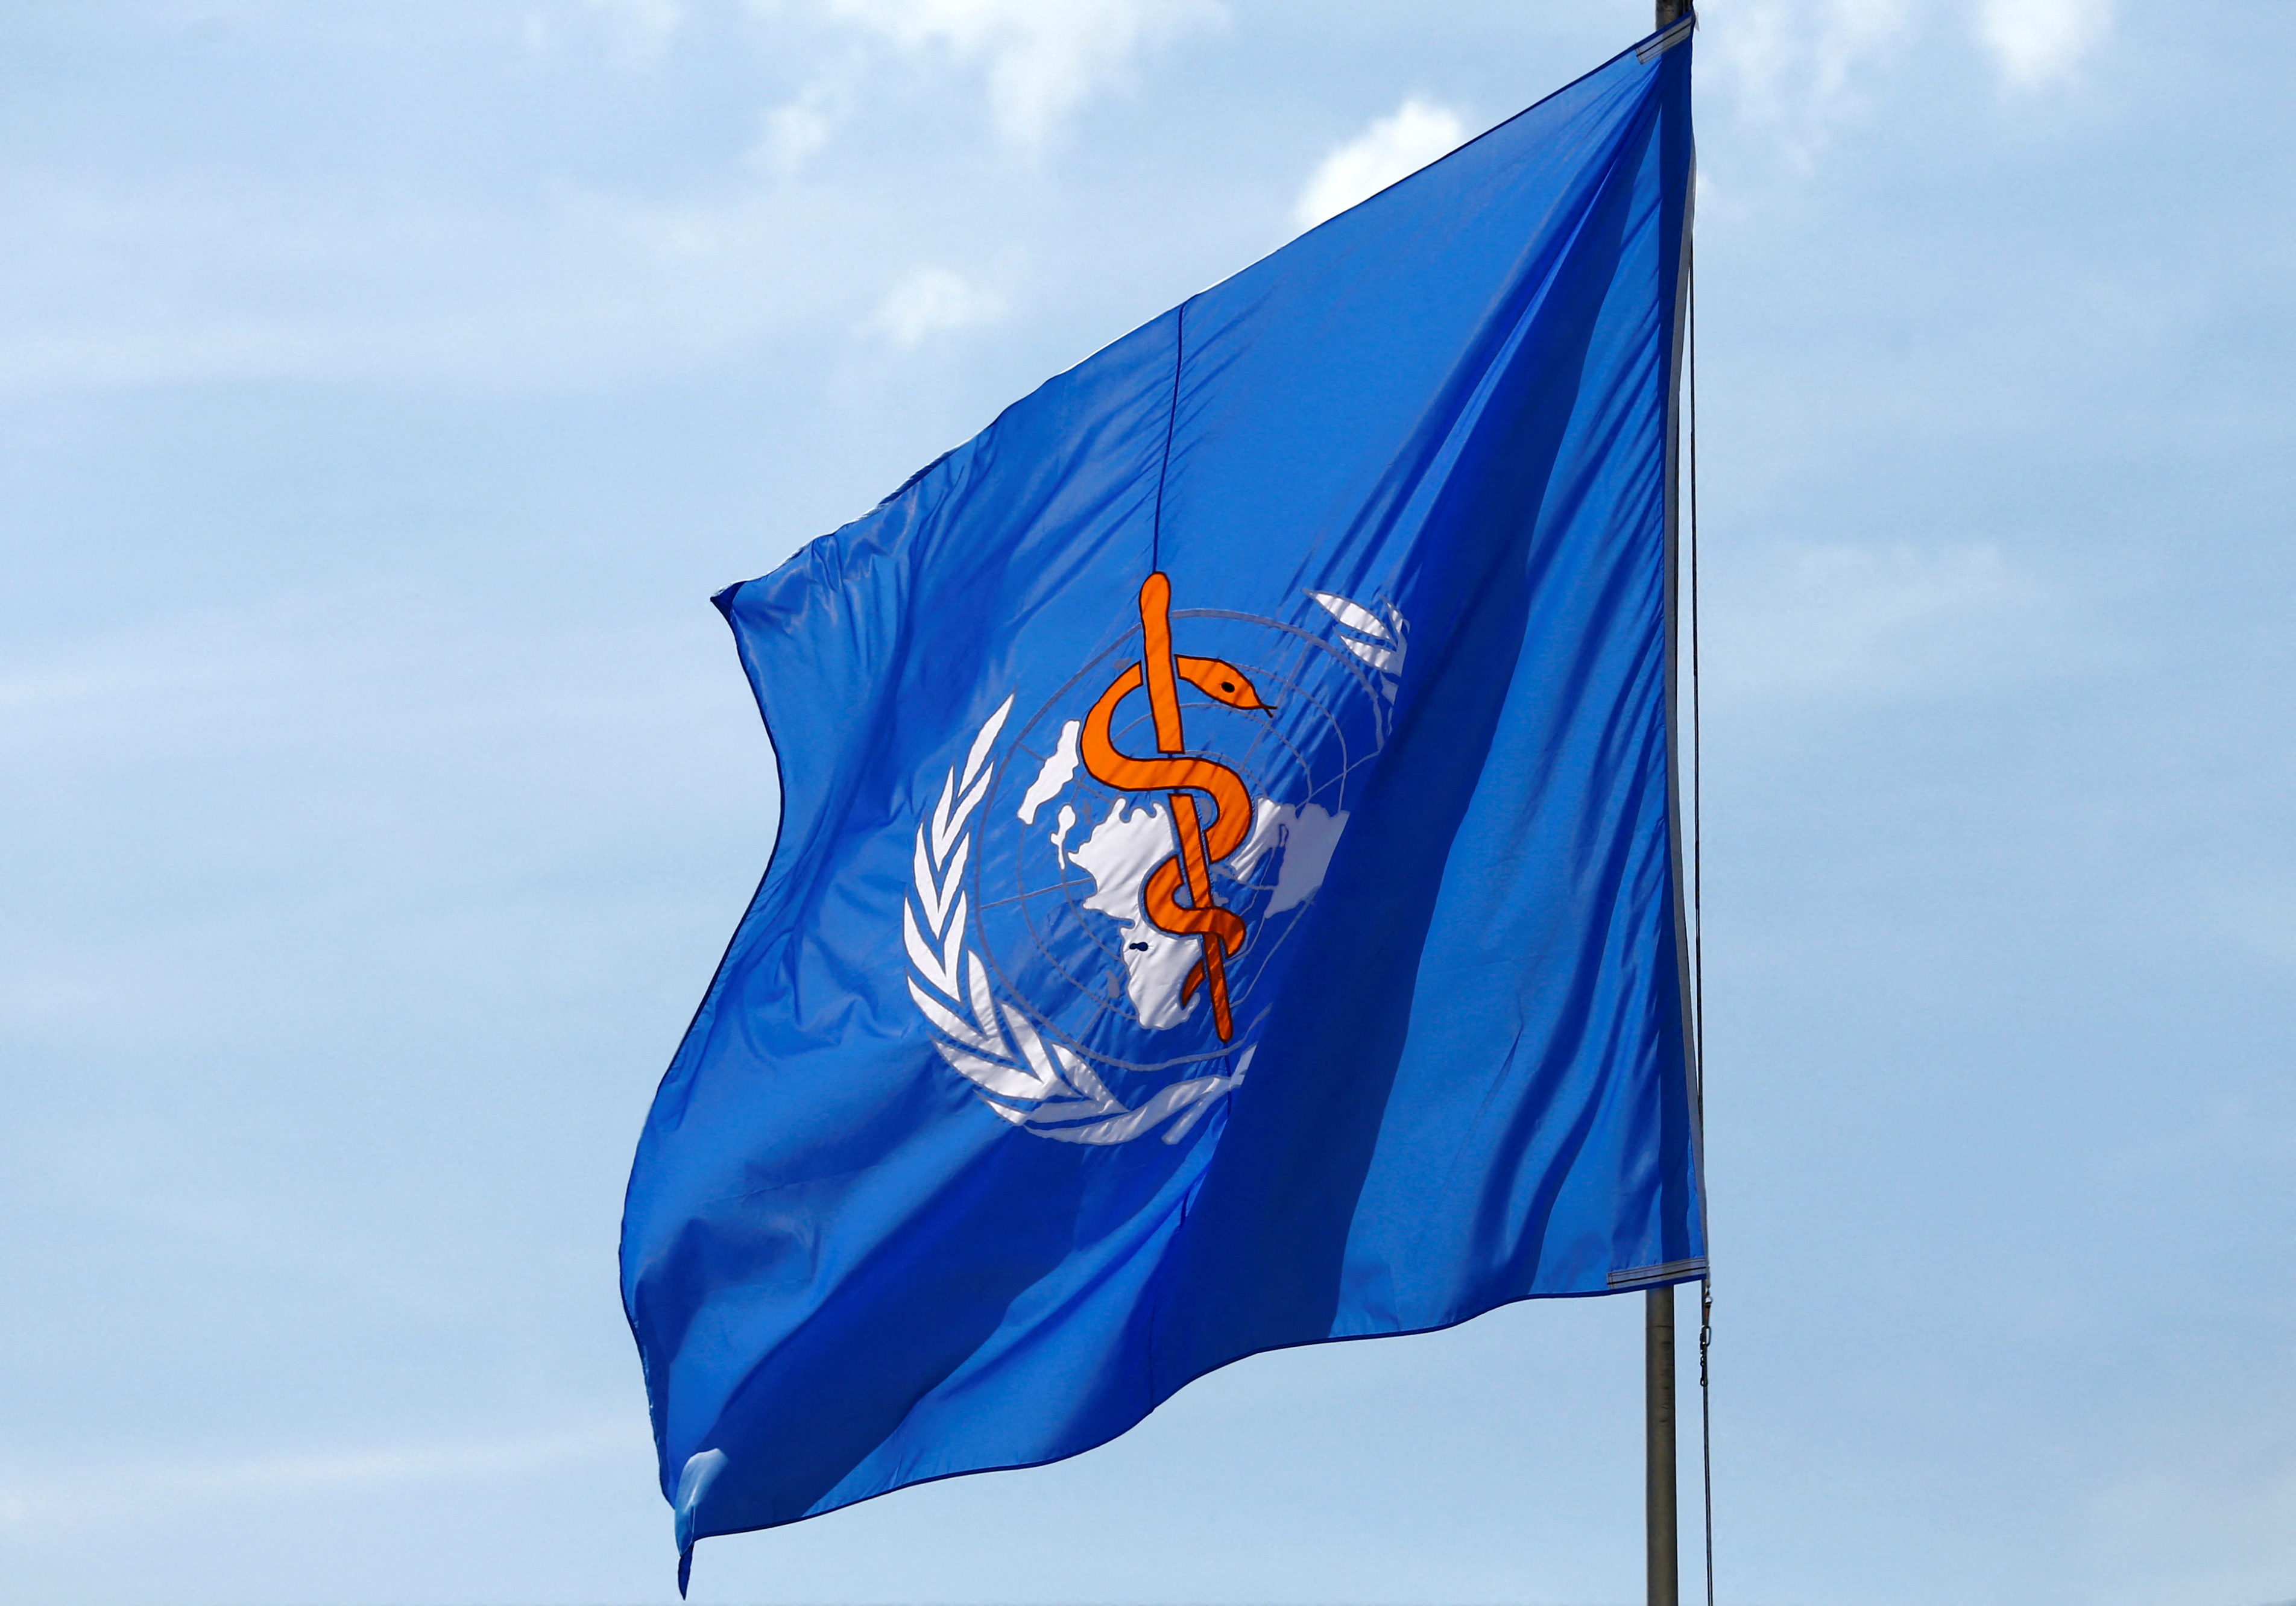 A WHO flag is pictured during a break between rounds of the election of the new Director General of the WHO in Geneva